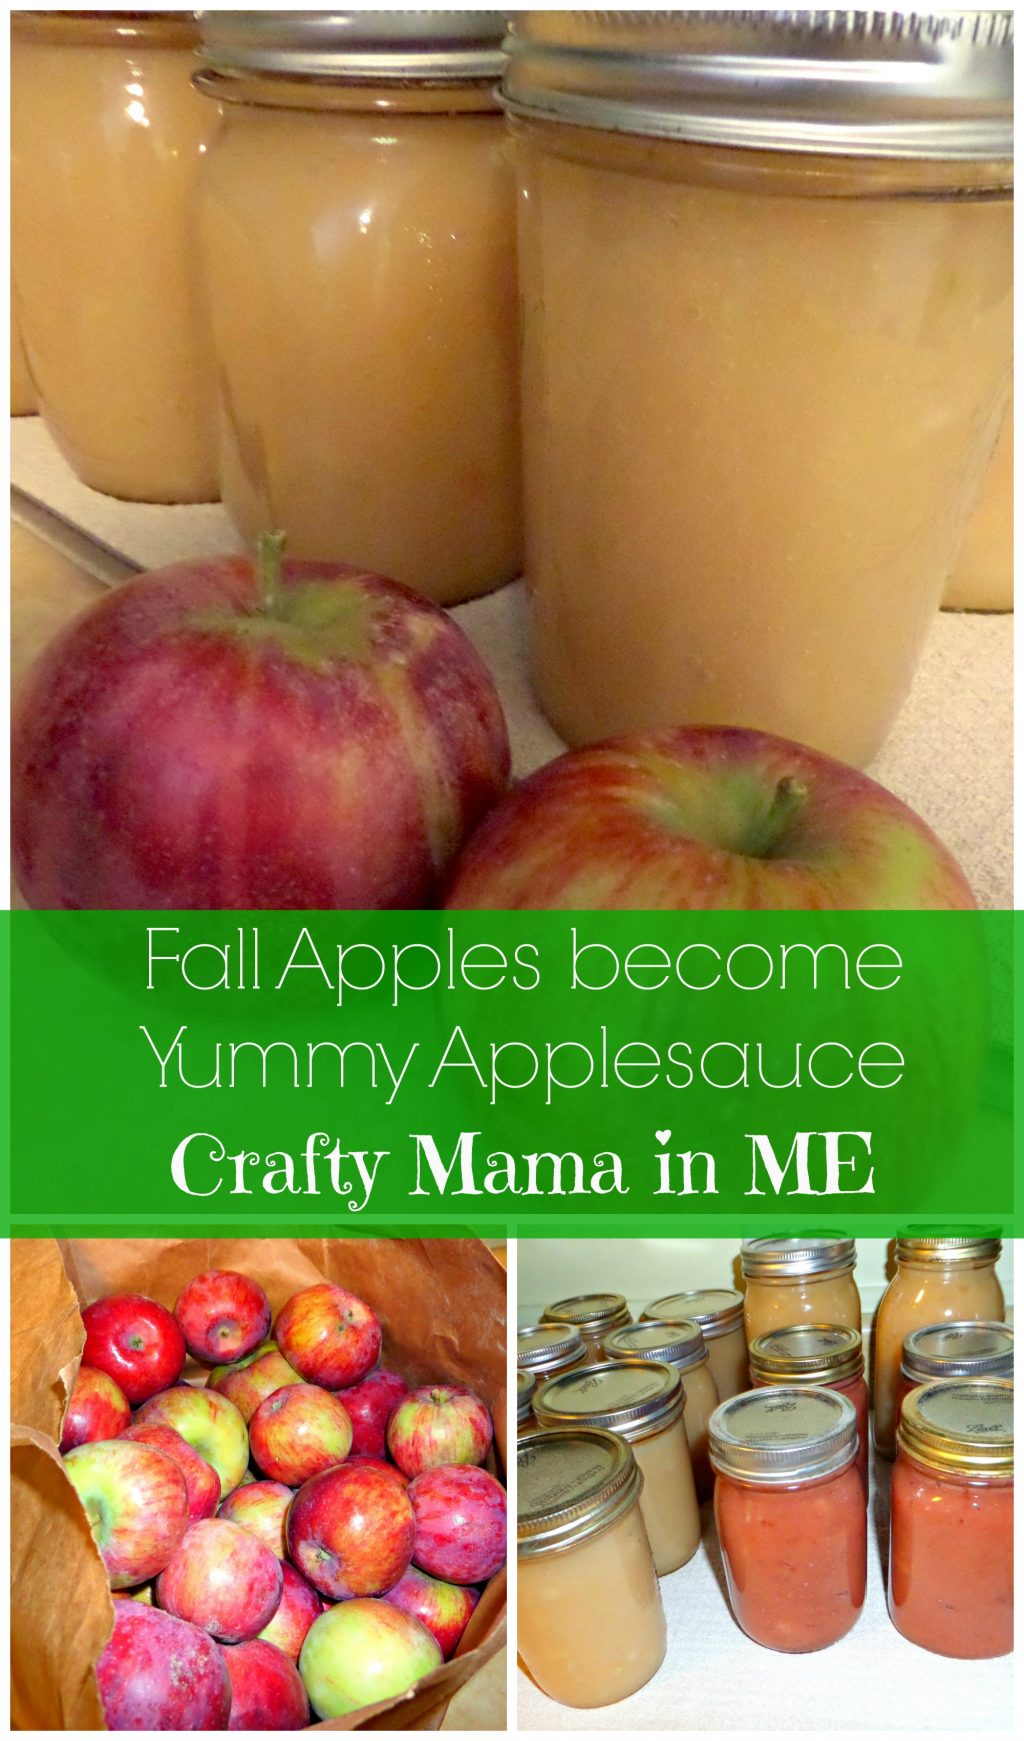 Fall Apples become Yummy Applesauce for the Year